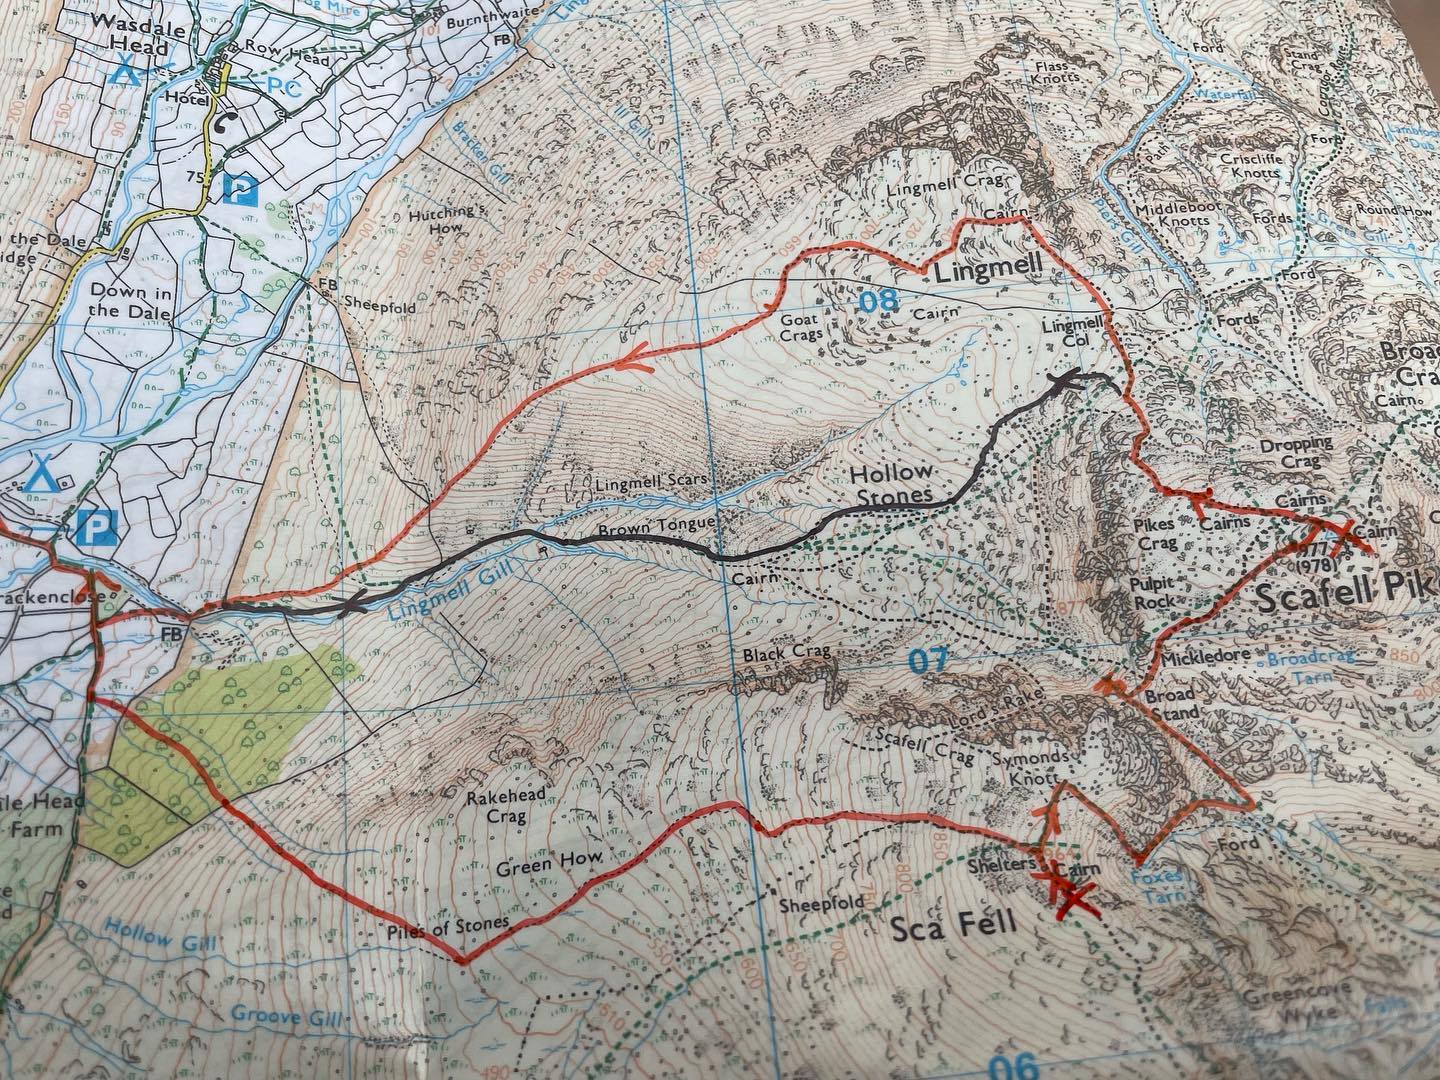 Next weekend’s plan, ask me after how close we got 😬 #scafellpike